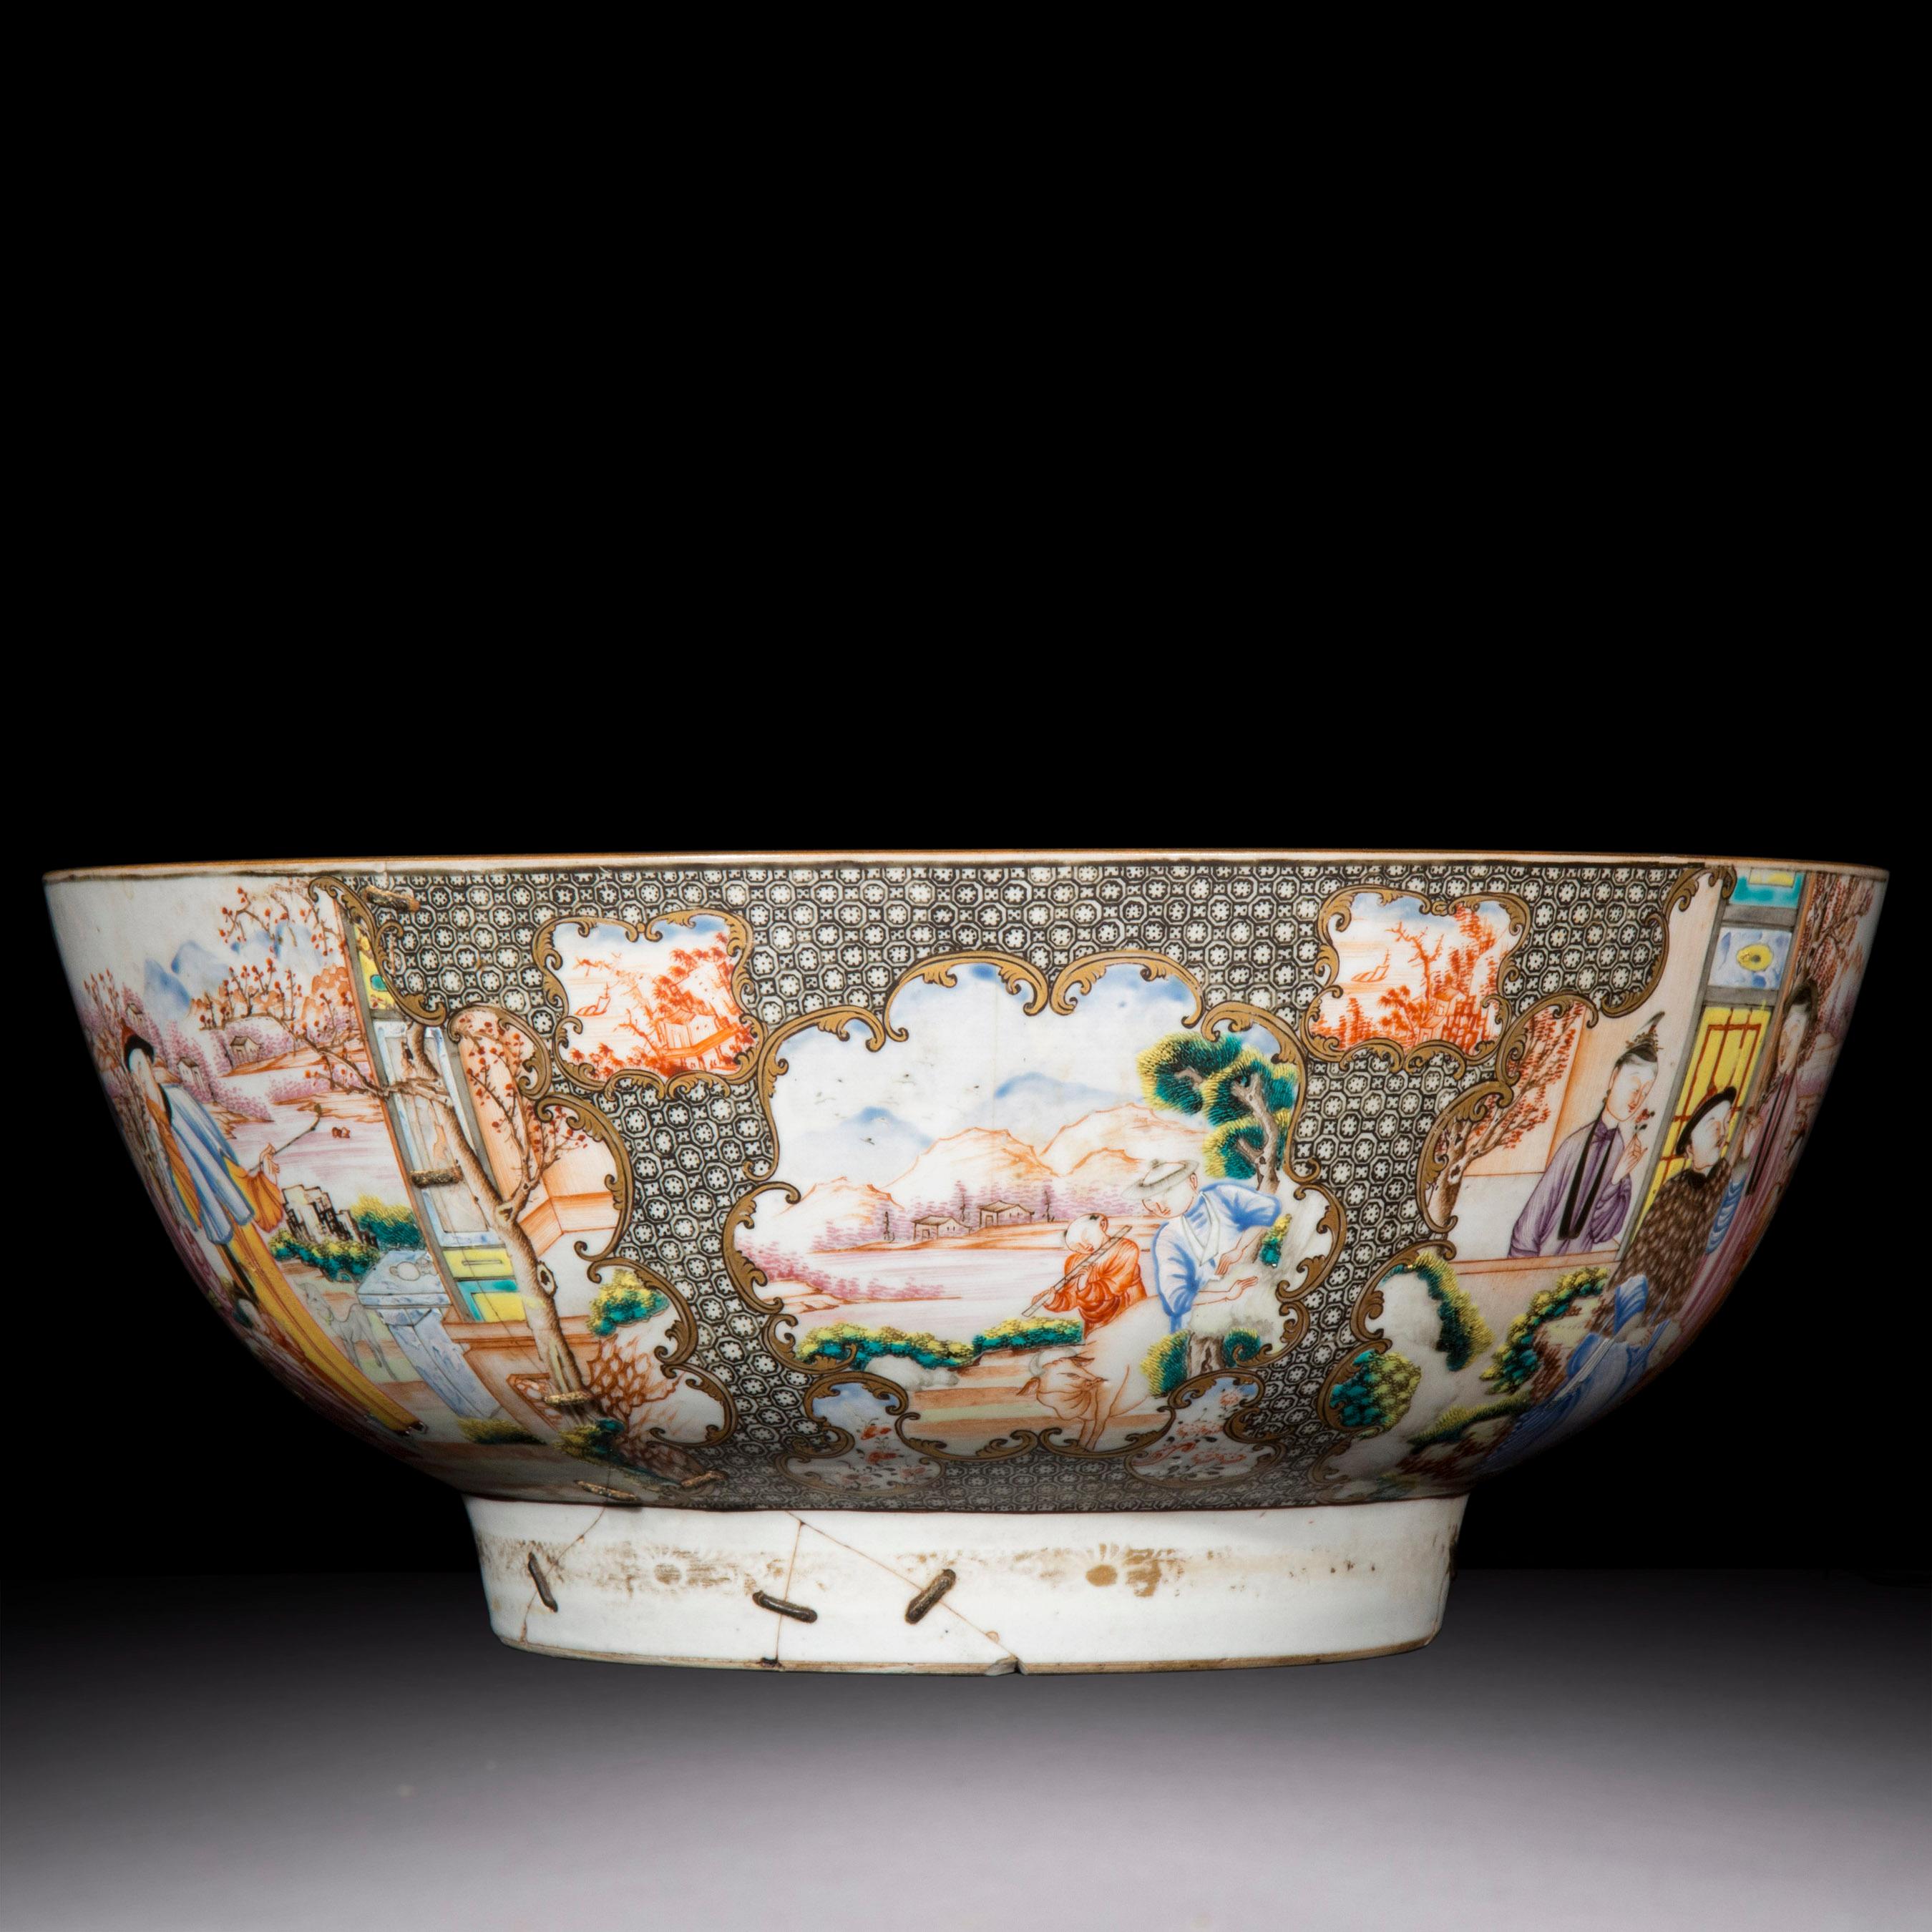 18th Century Chinese Export Porcelain Bowl with Old Riveted Repairs 4